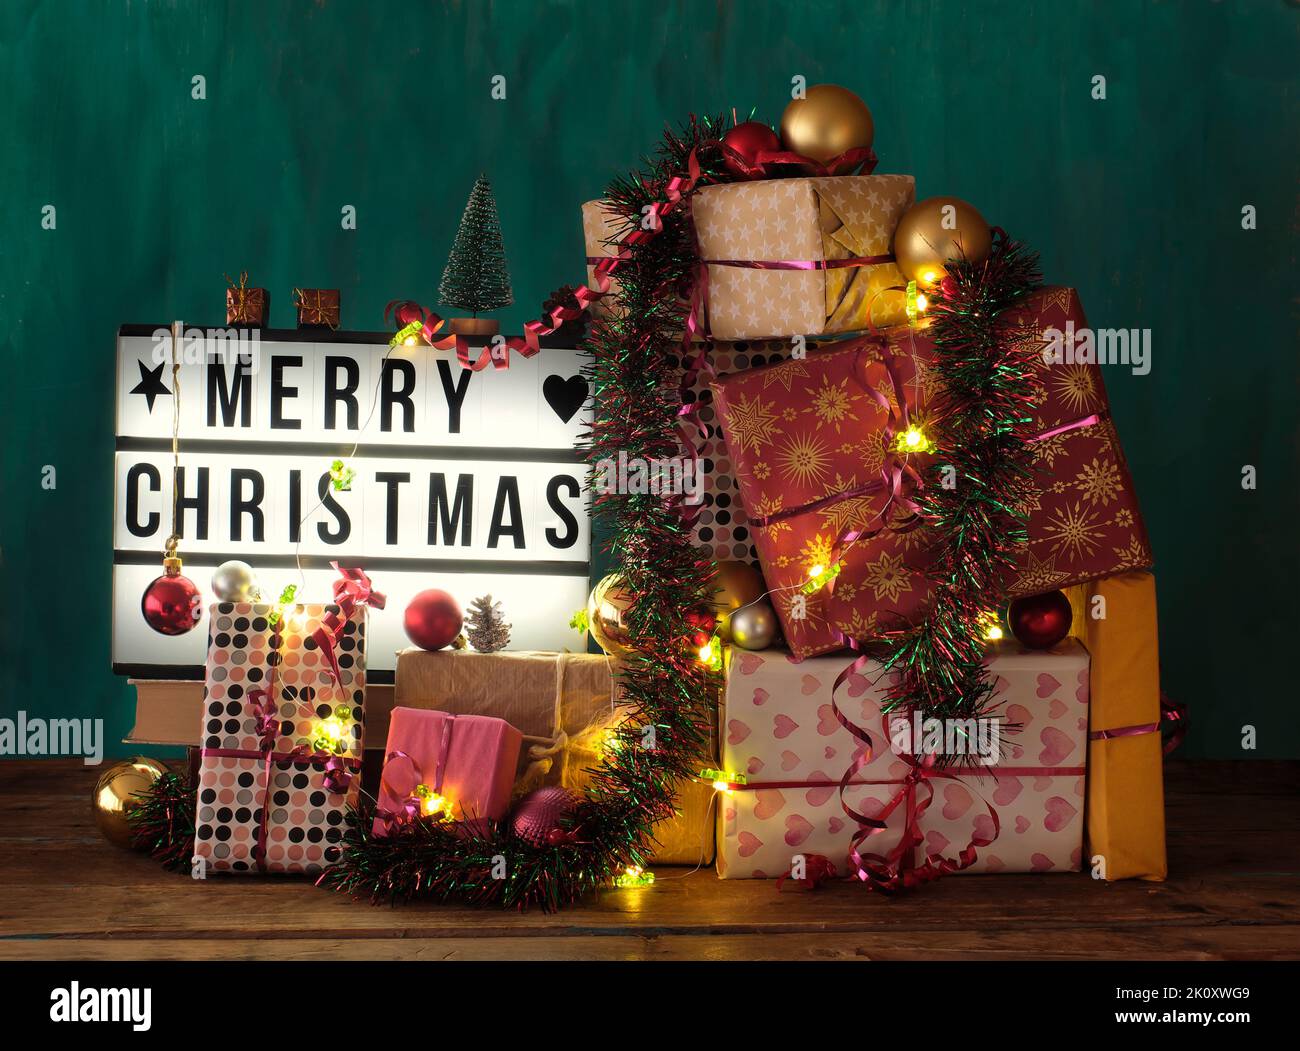 Christmas gifts, gift wrap,decoration,lights and display with caption Merry Christmas Stock Photo